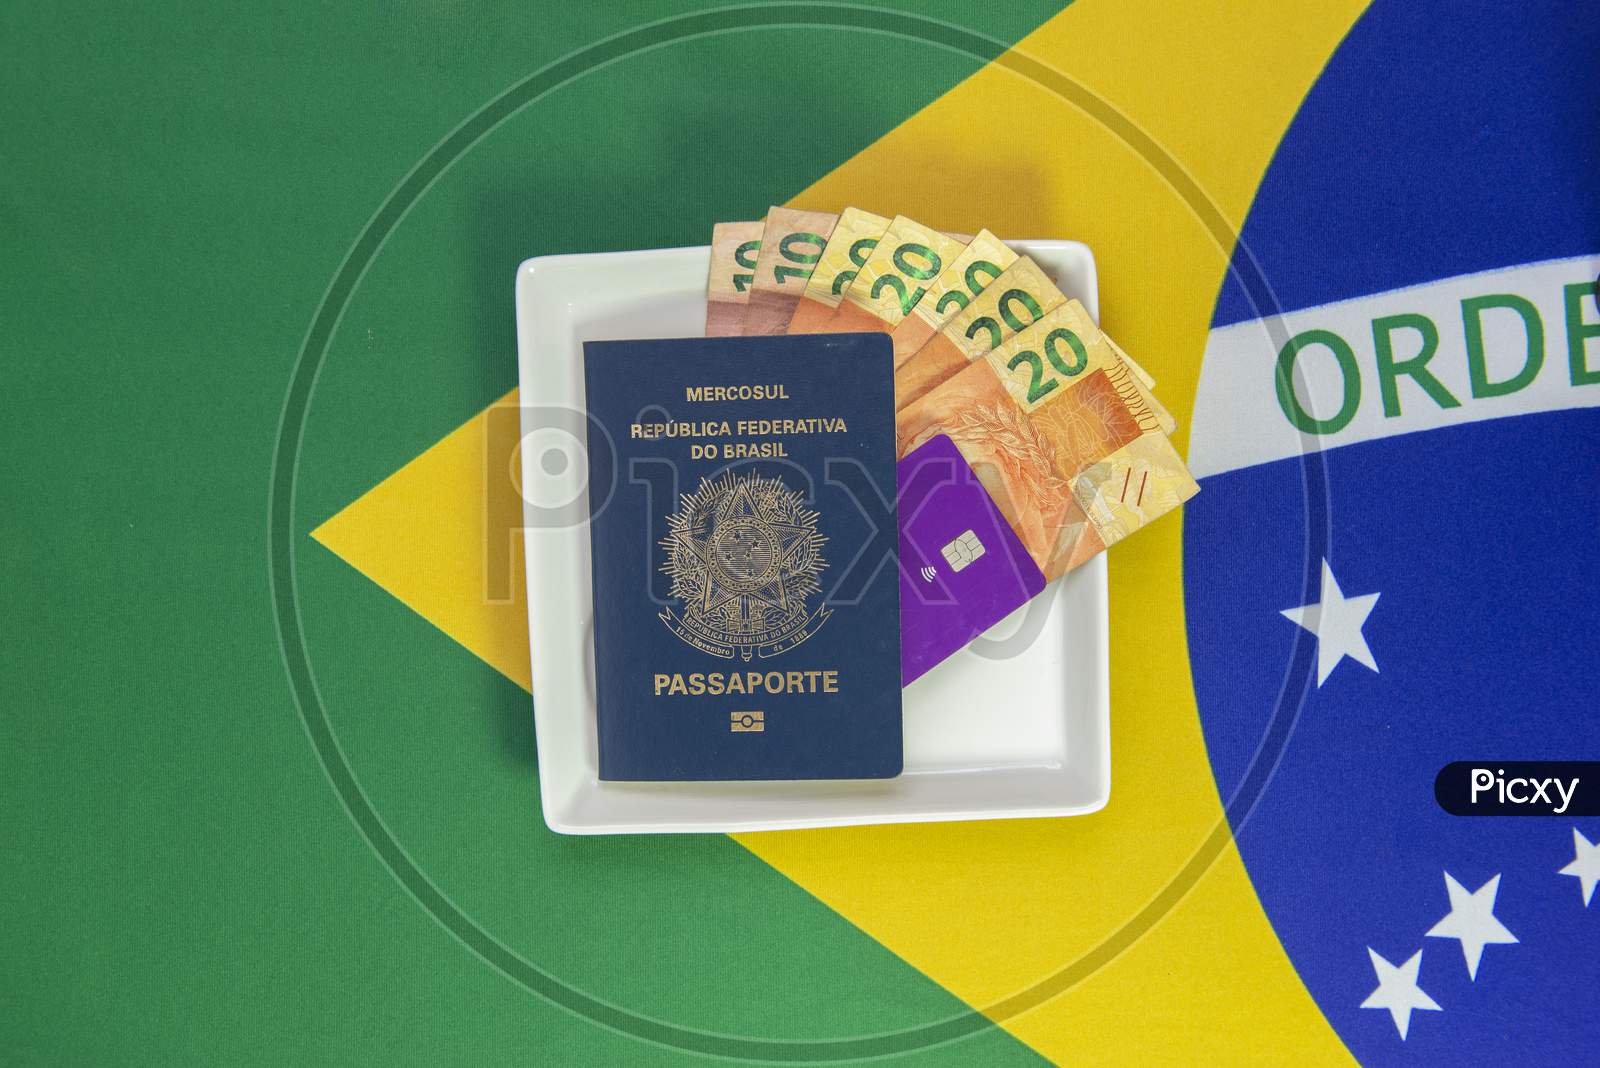 Brazilian Passport, Banknotes And Credit Card On A Square Plate With The Flag Of Brazil In The Background. Concept Of Travel And Shopping Expenses. Immigration And Emigration. Copy Space.